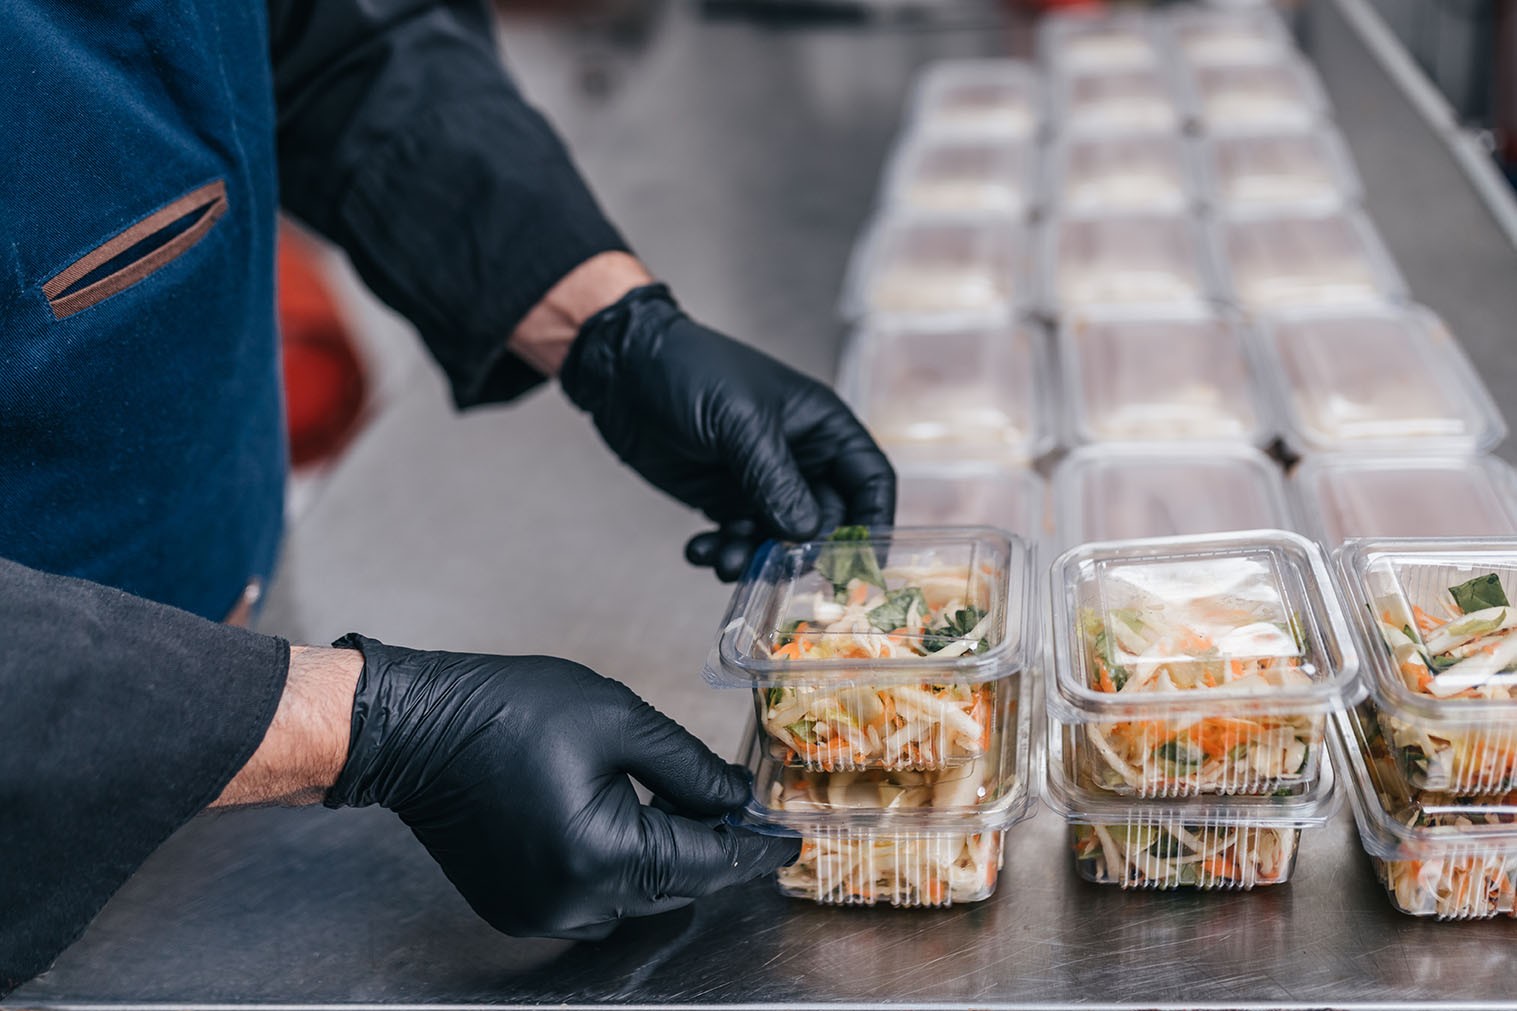 While efforts to promote sustainability and reduce plastic waste are ongoing, single-use plastics continue to offer unmatched convenience and versatility.